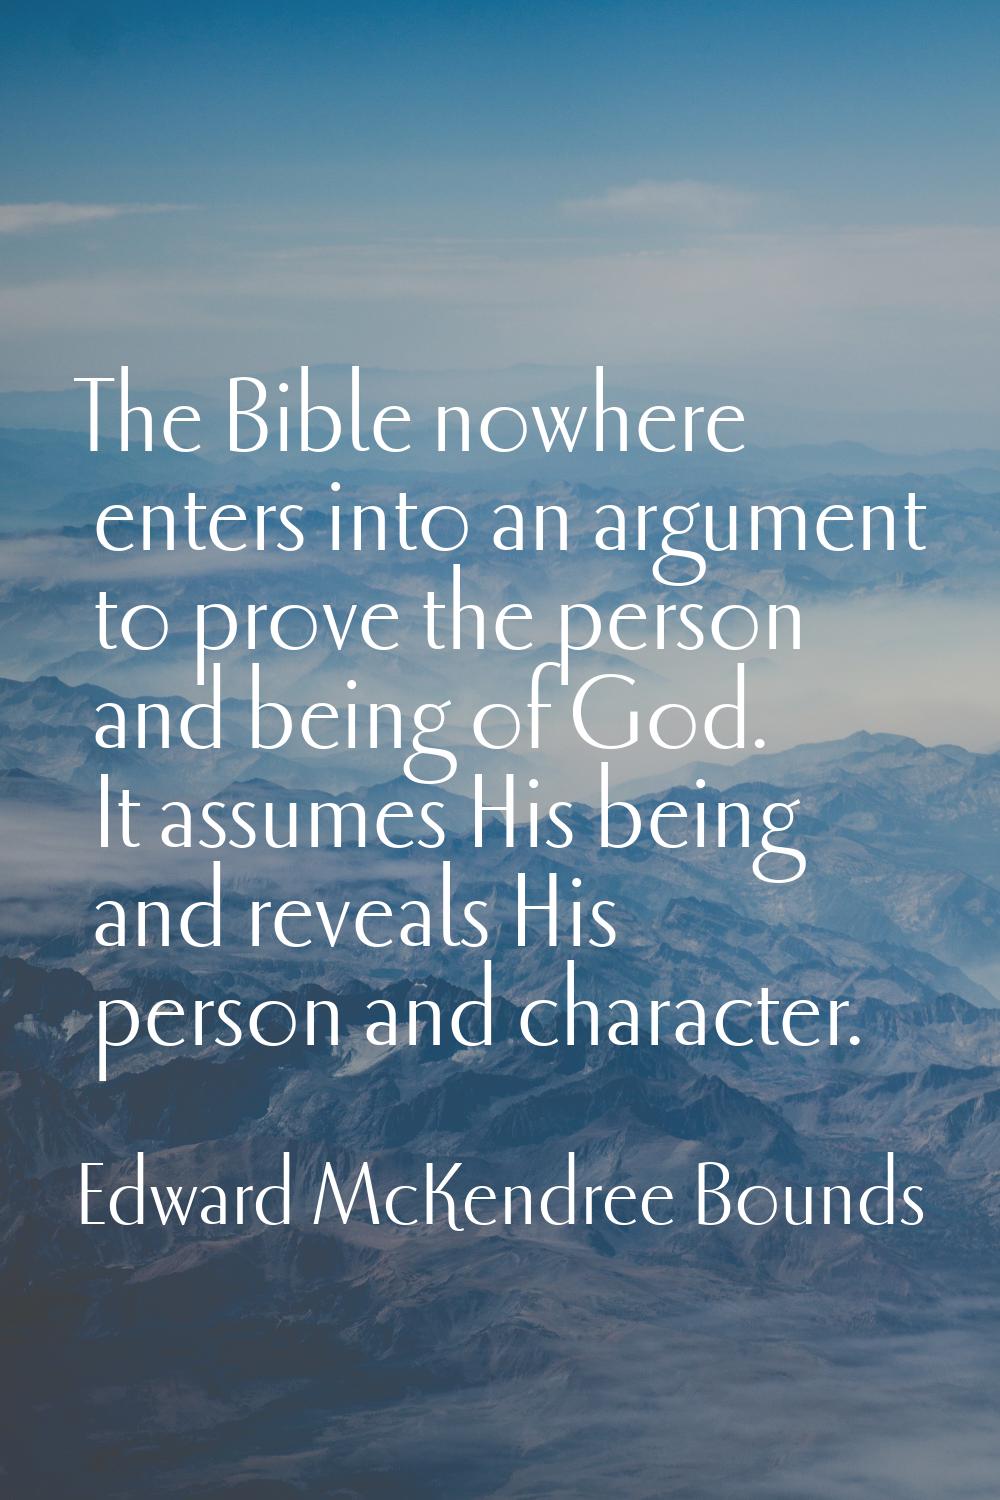 The Bible nowhere enters into an argument to prove the person and being of God. It assumes His bein